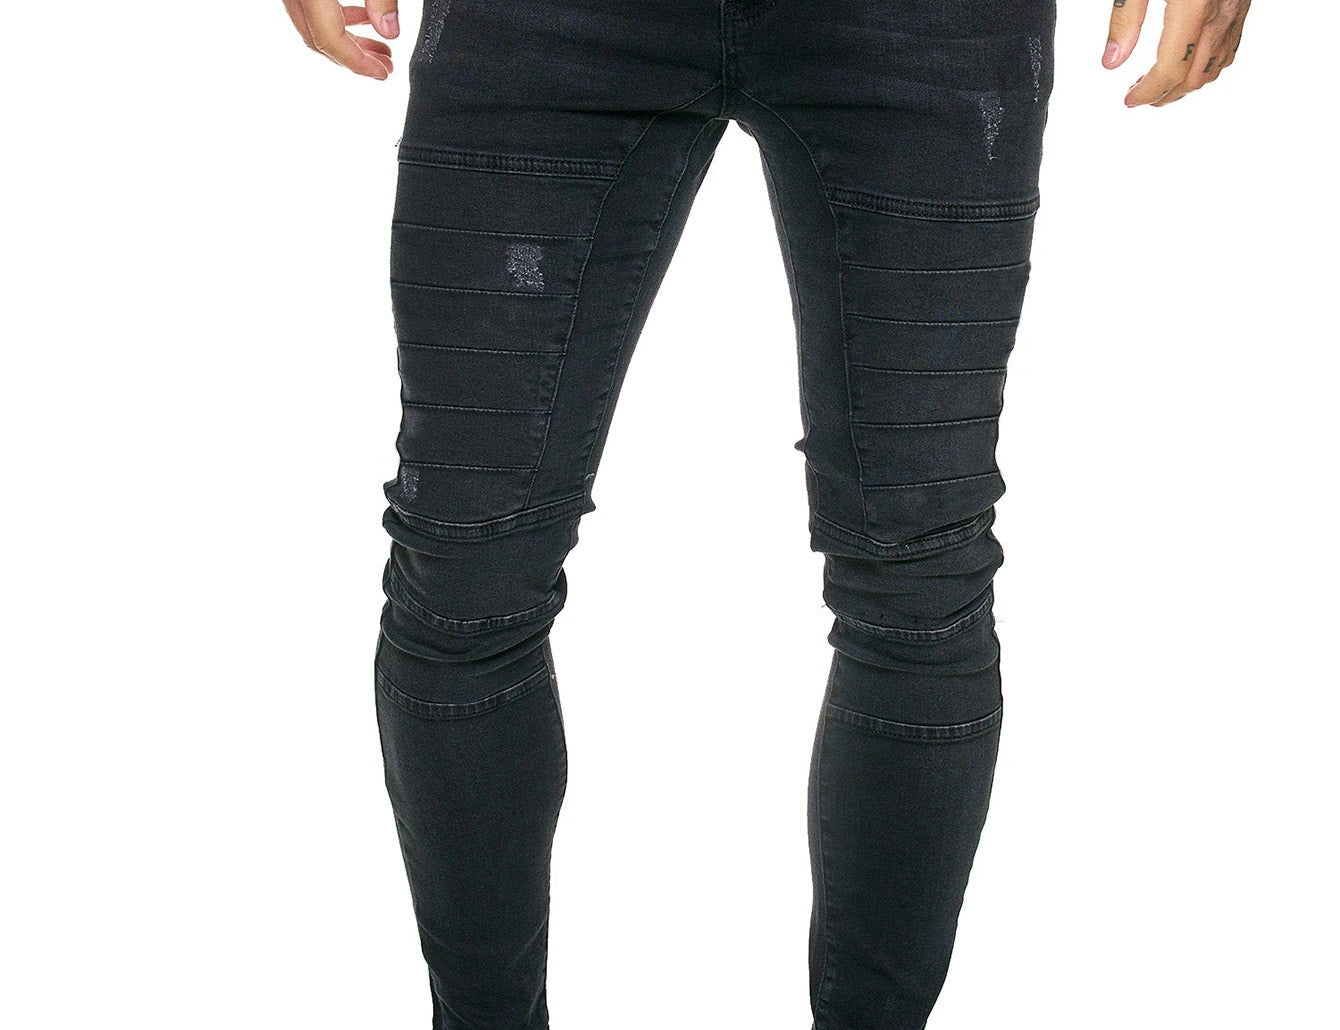 BNJO - Skinny Legs Denim Jeans for Men - Sarman Fashion - Wholesale Clothing Fashion Brand for Men from Canada